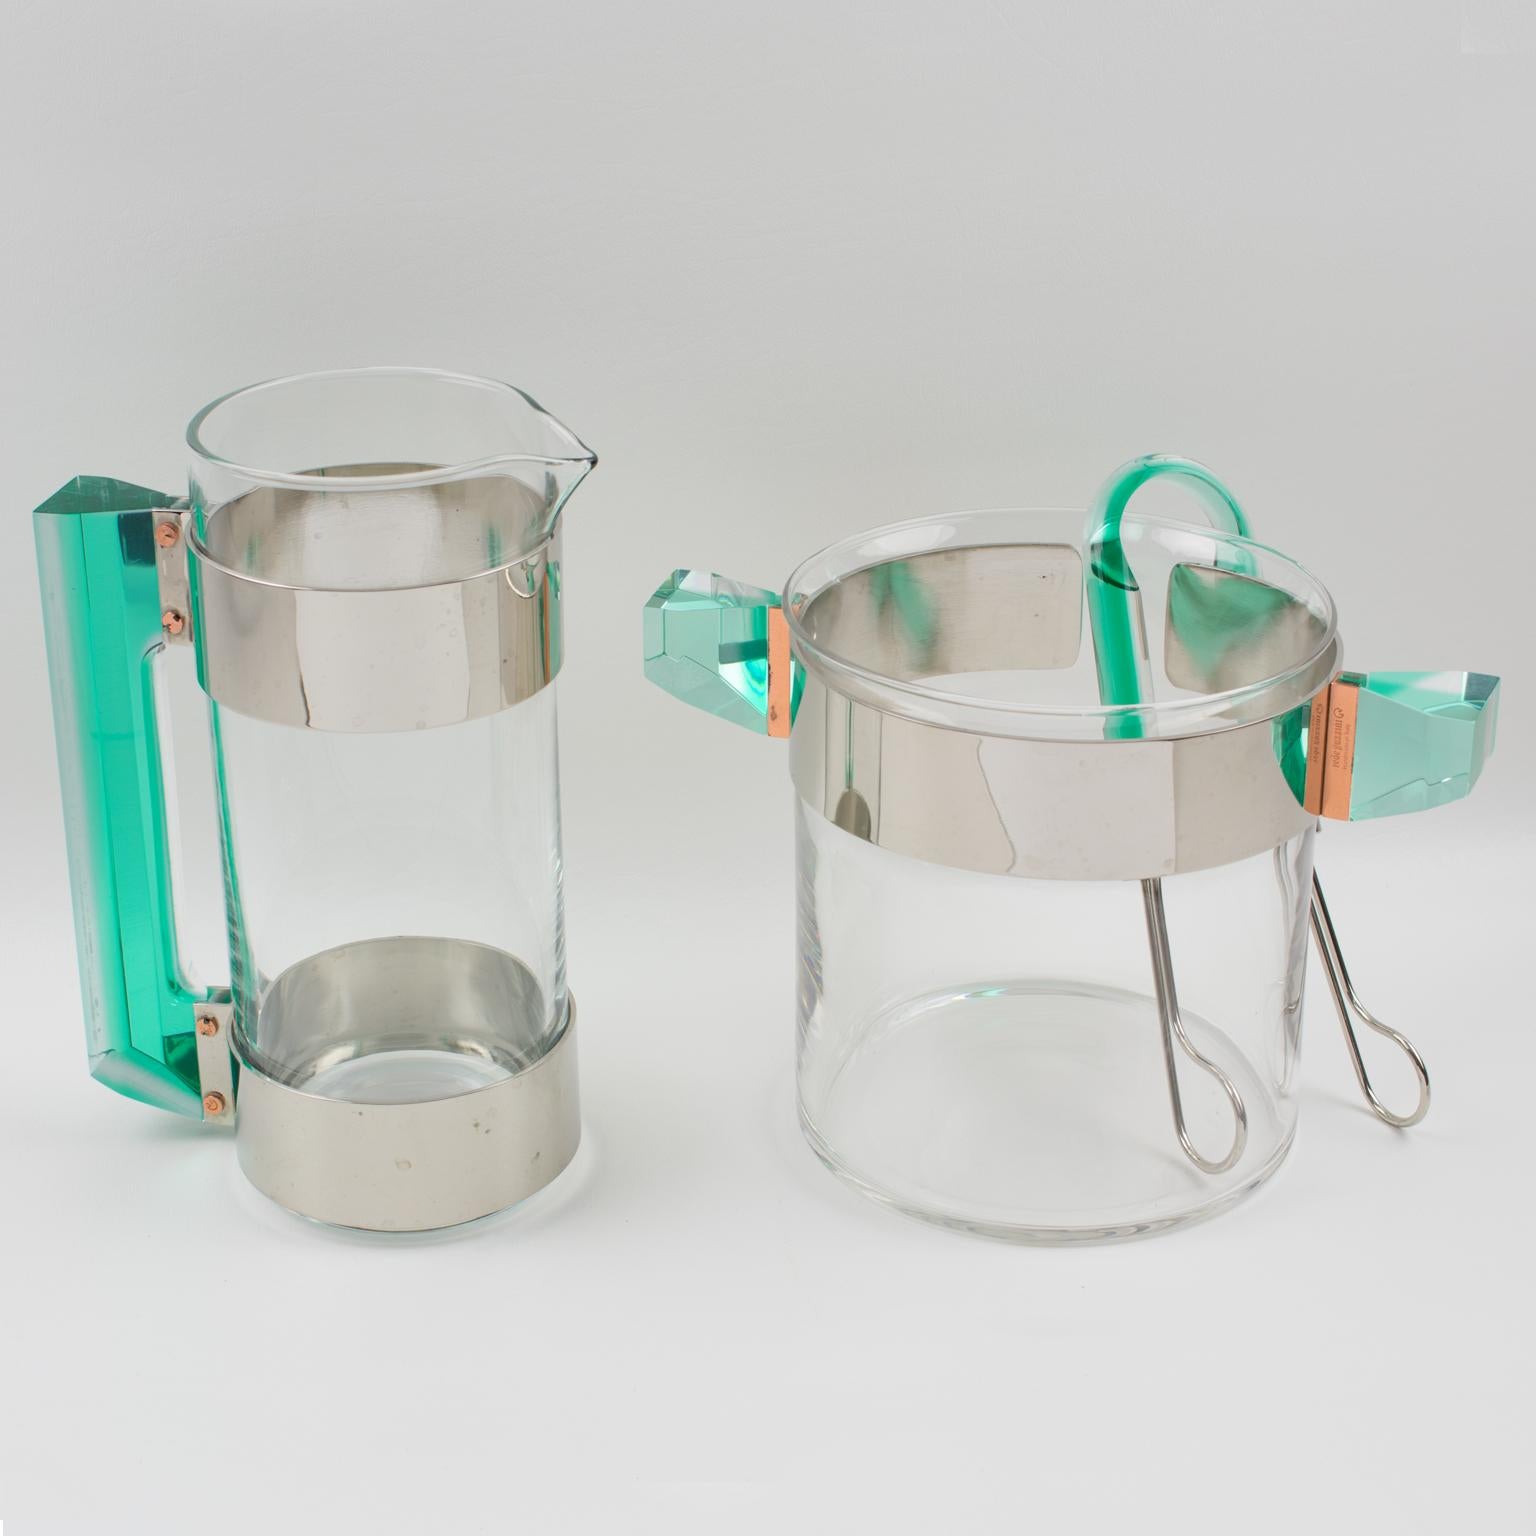 A stylish barware set designed by Italian Rede Guzzini from the 1970s. This set includes a martini pitcher or jug and an ice bucket with its pair of tongs. Molded glass containers with silver plate and copper metal framing compliment with incredible